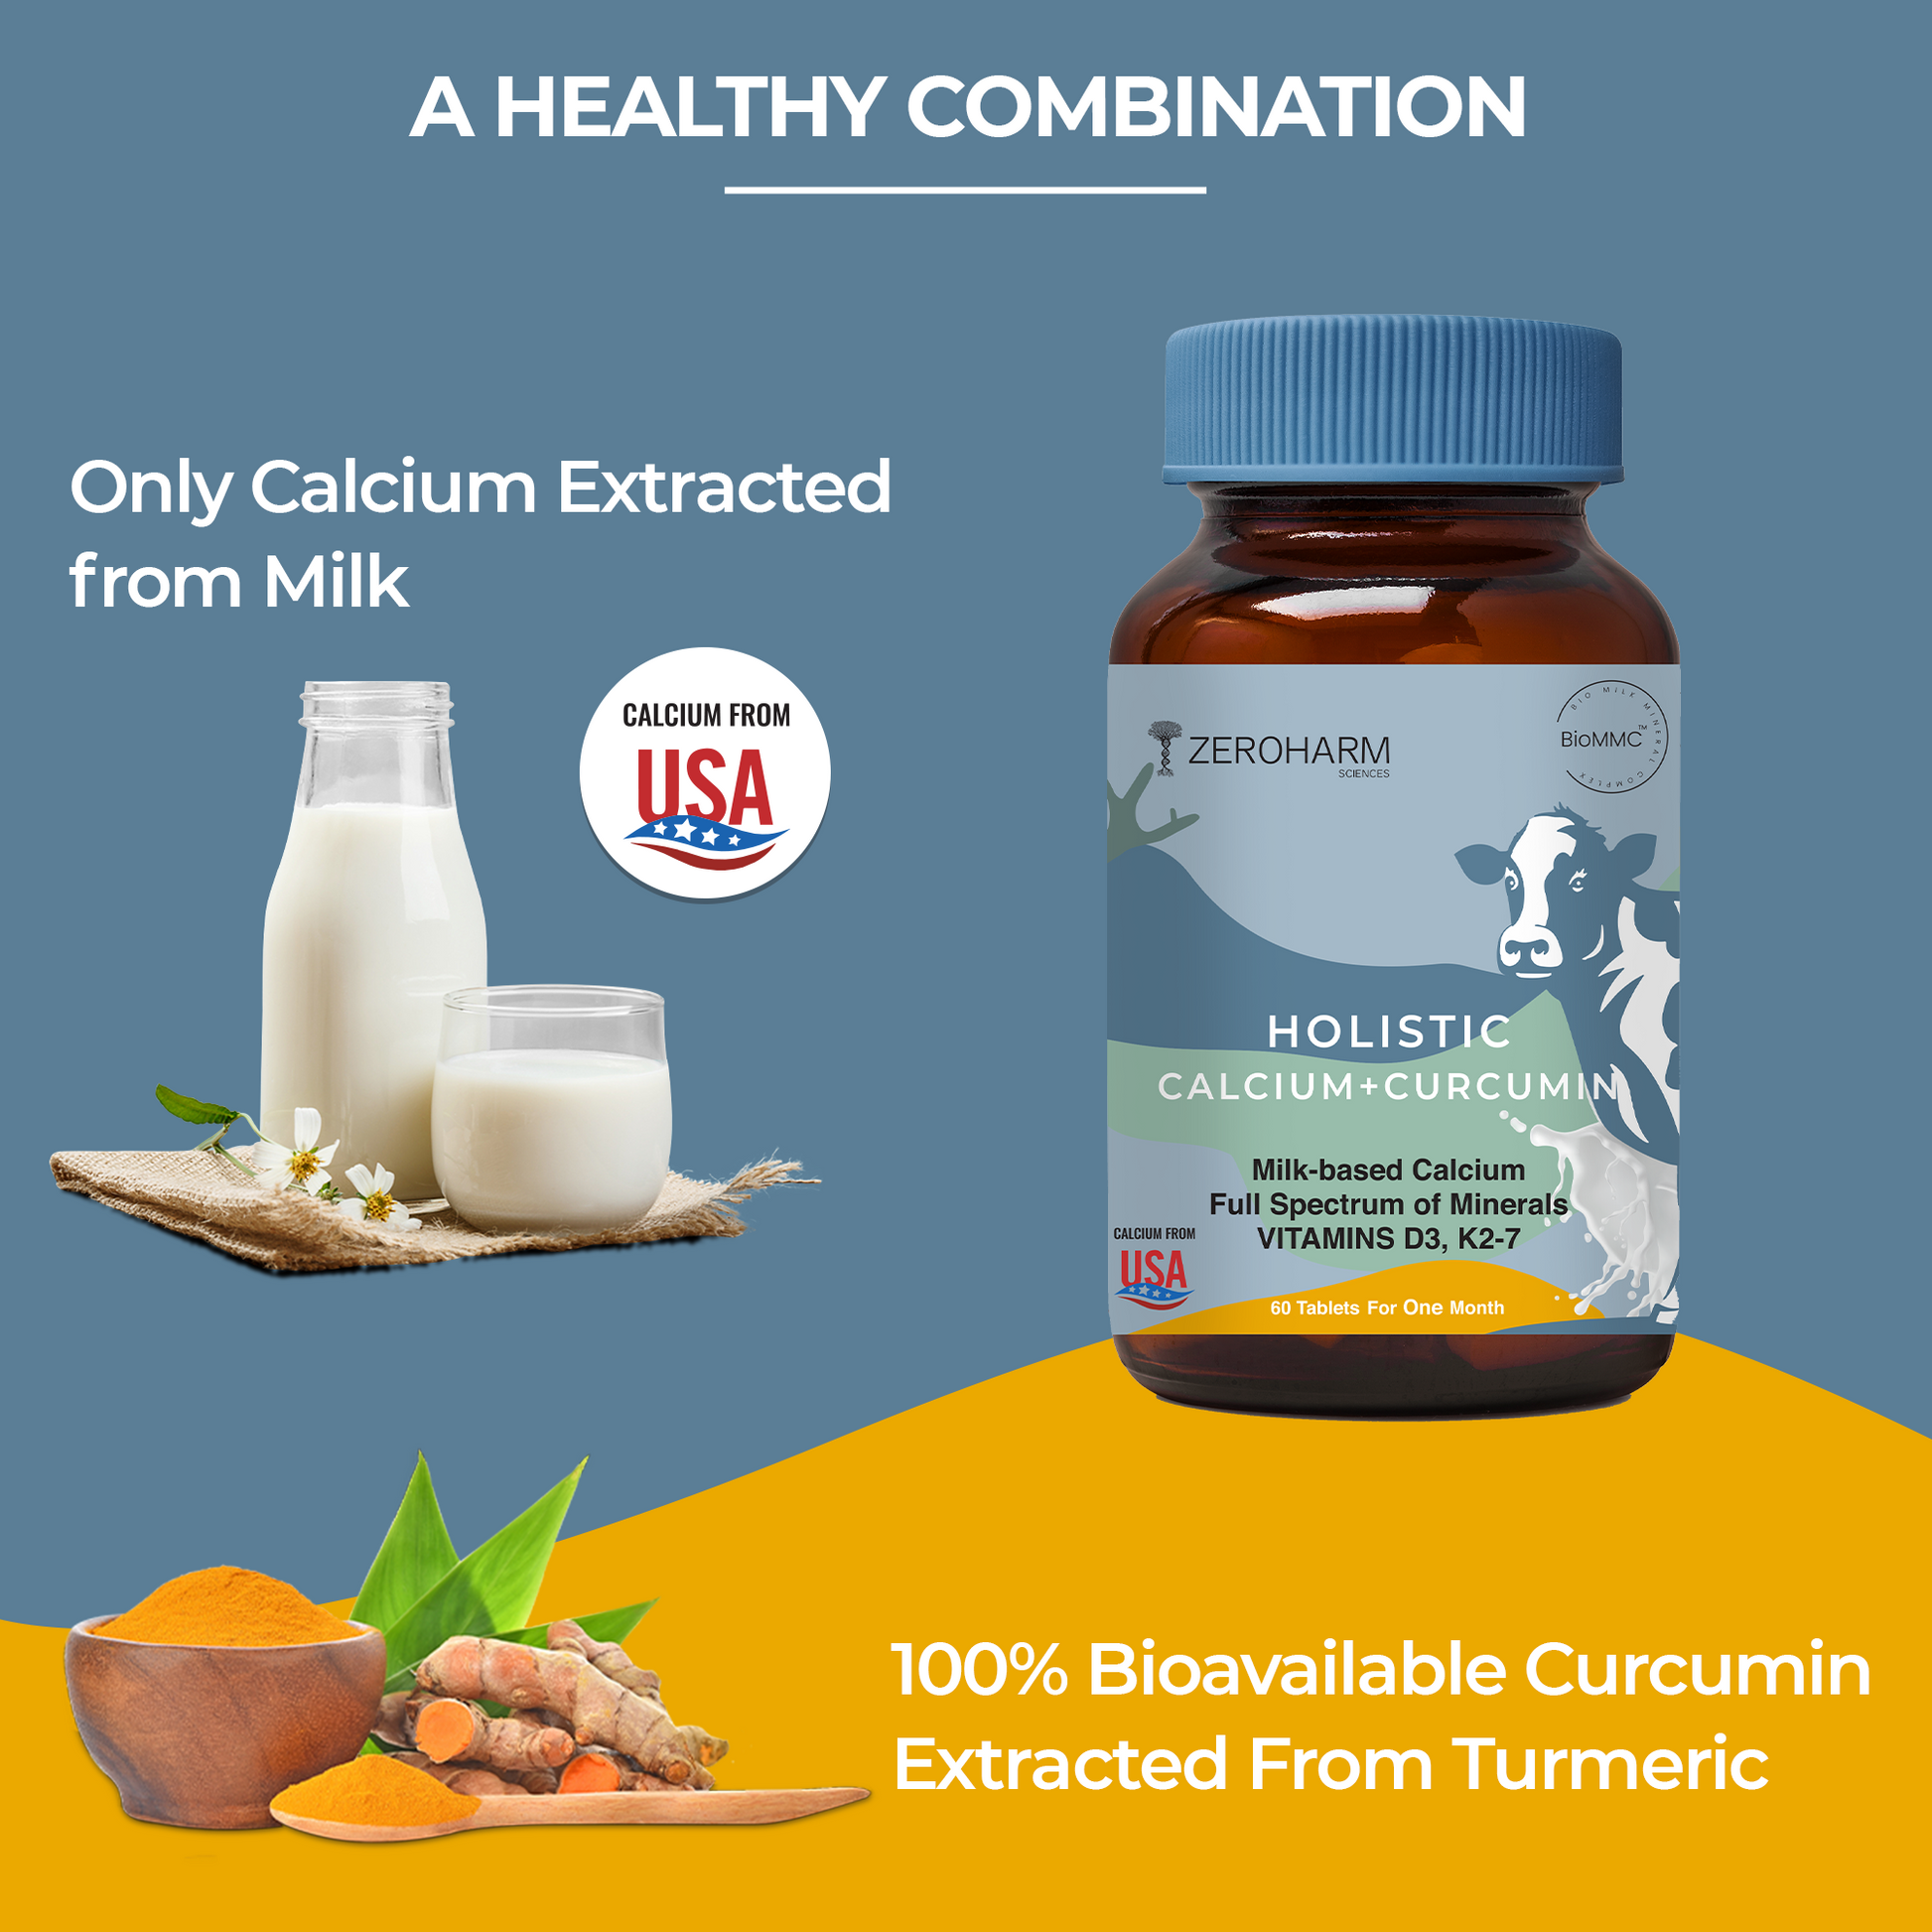 calcium phosphate pills with a healthy combination of calcium extracted from milk and curcumin extracted from turmeric